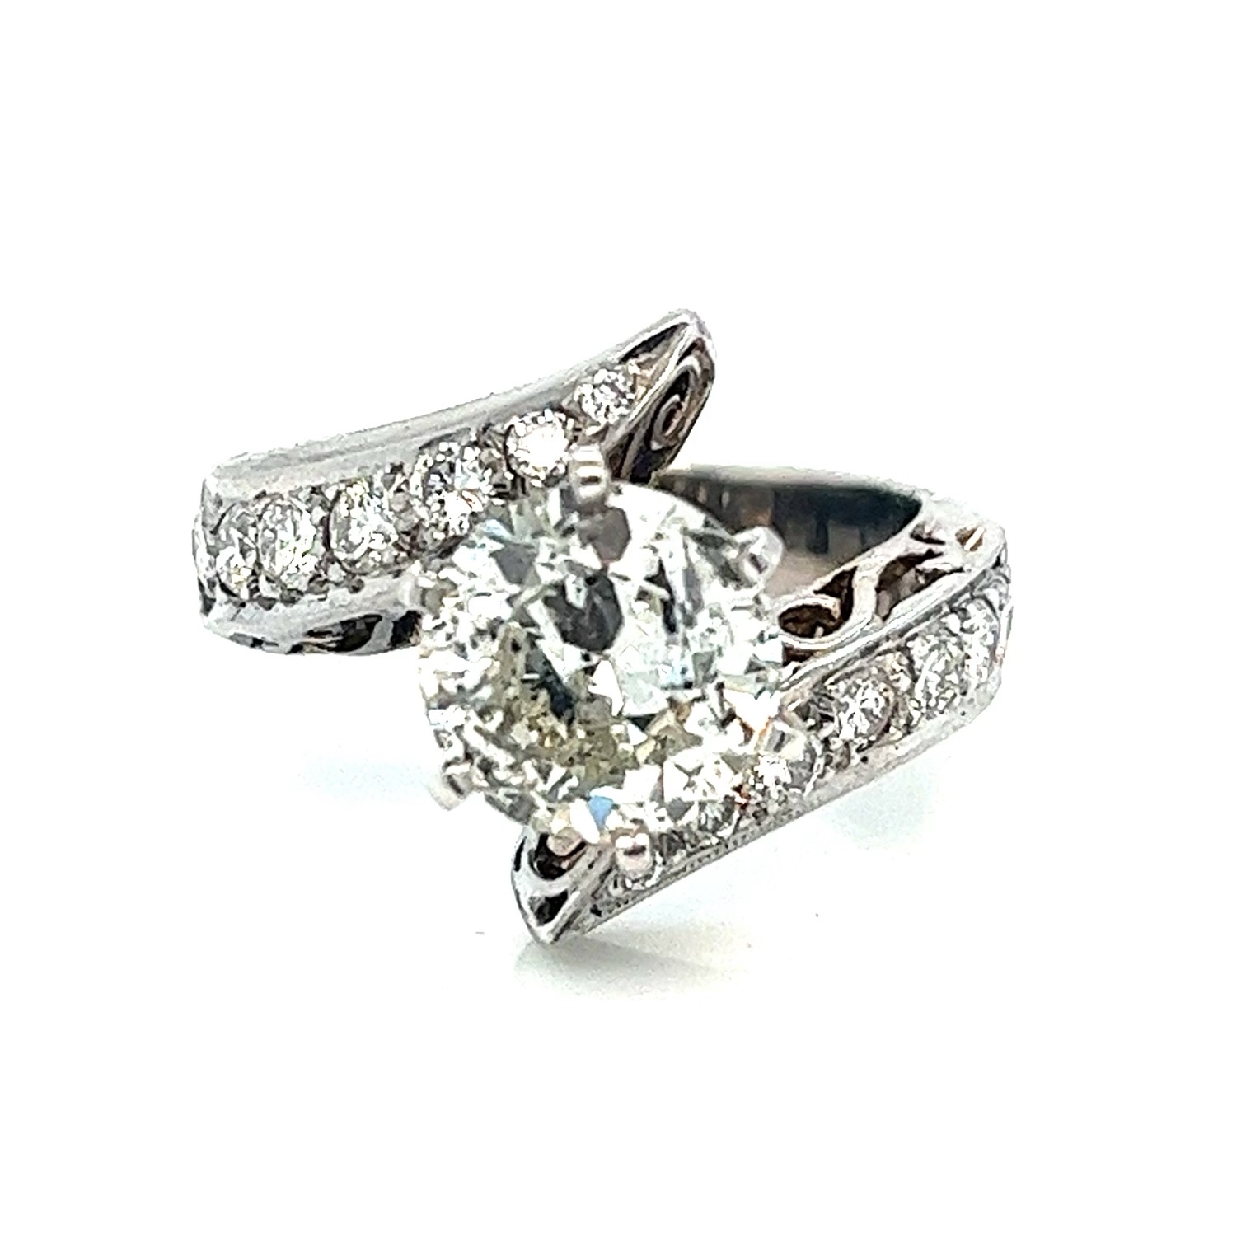 14K White Gold Diamond Bypass Ring with a 2CT I2/N Center Stone and Diamonds Accents
Size 6.5